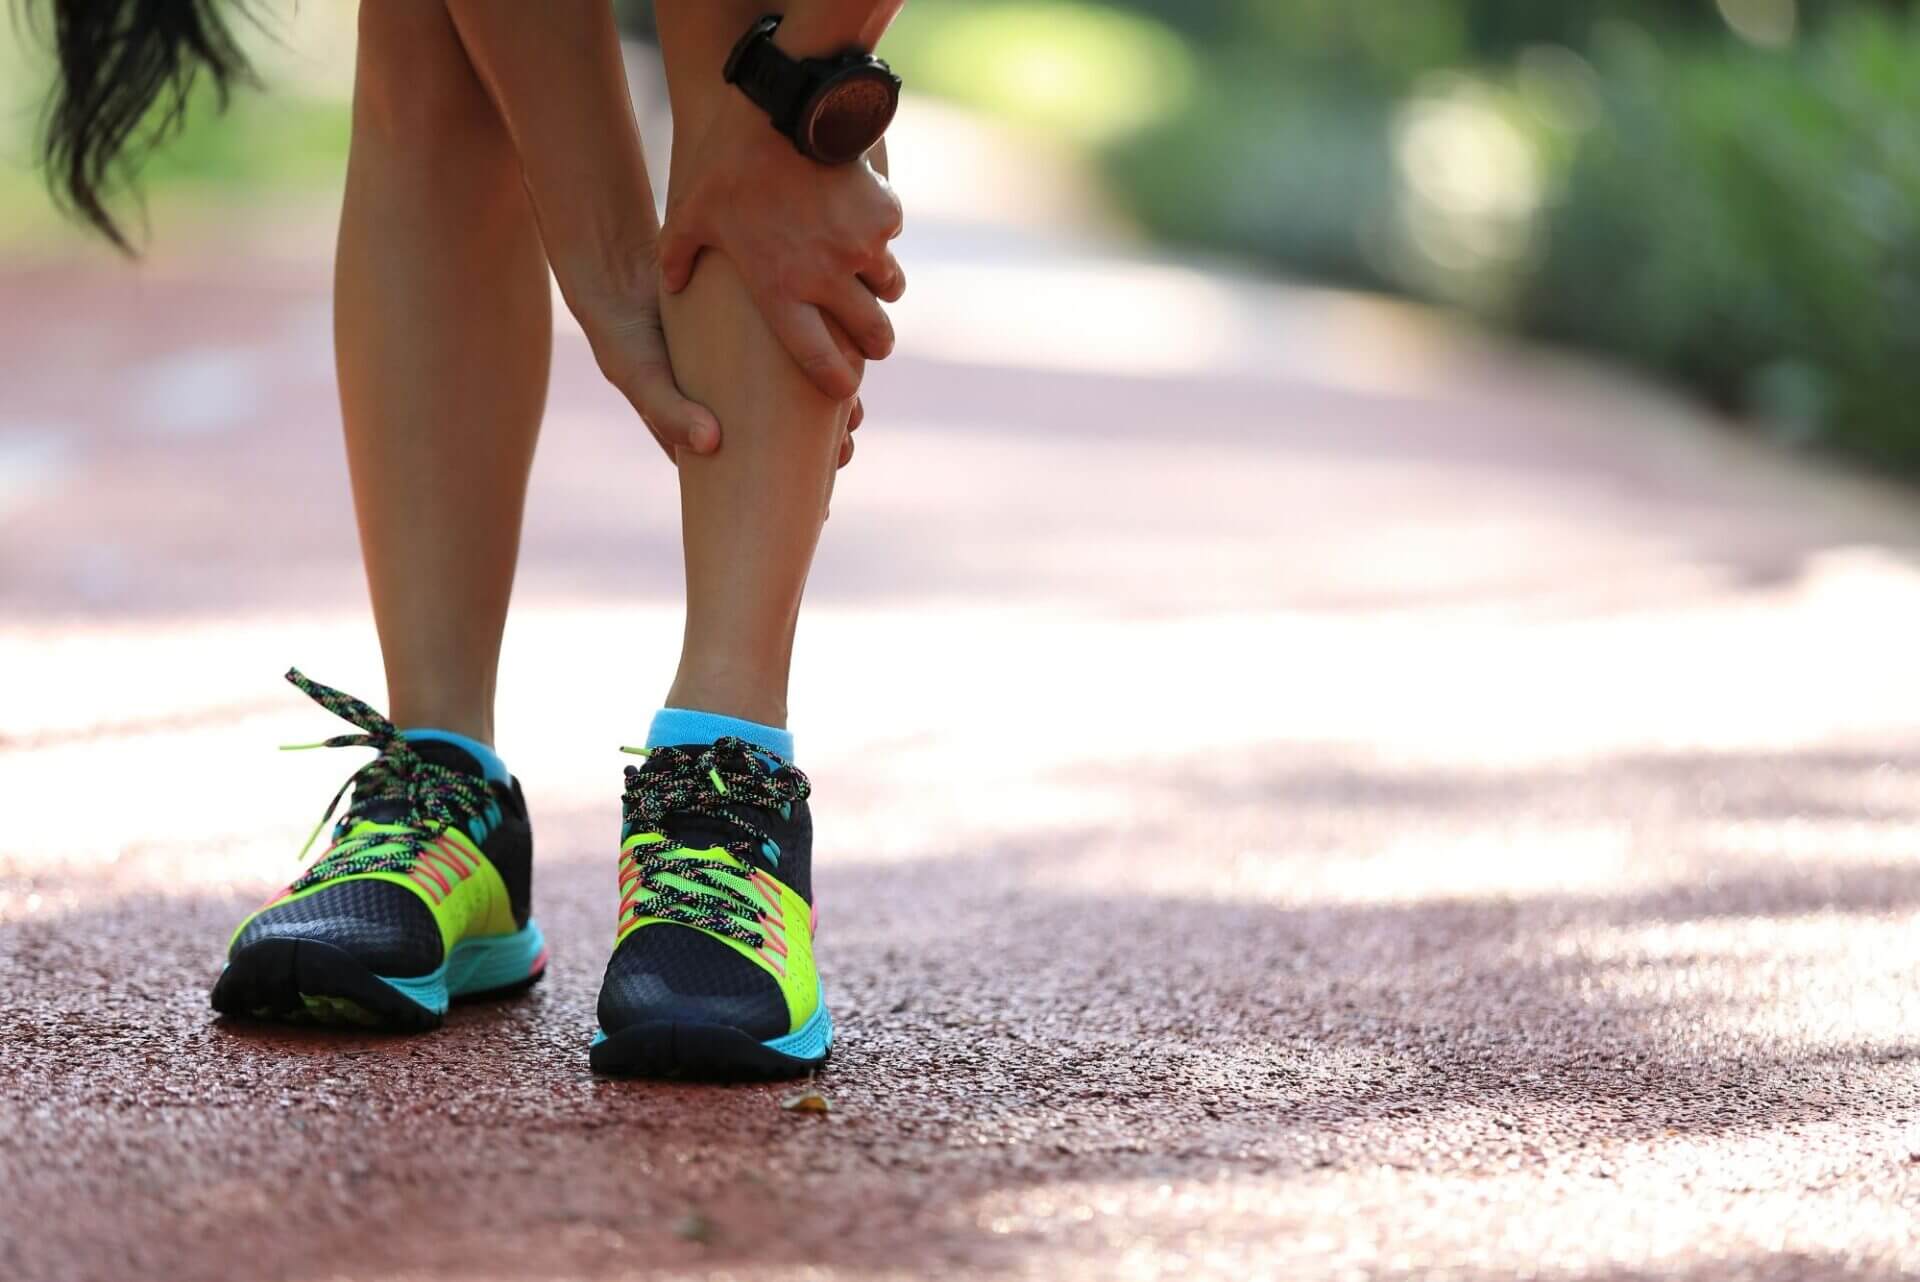 How to Get Rid of Shin Splints – 3 Proven Methods For Fast Relief